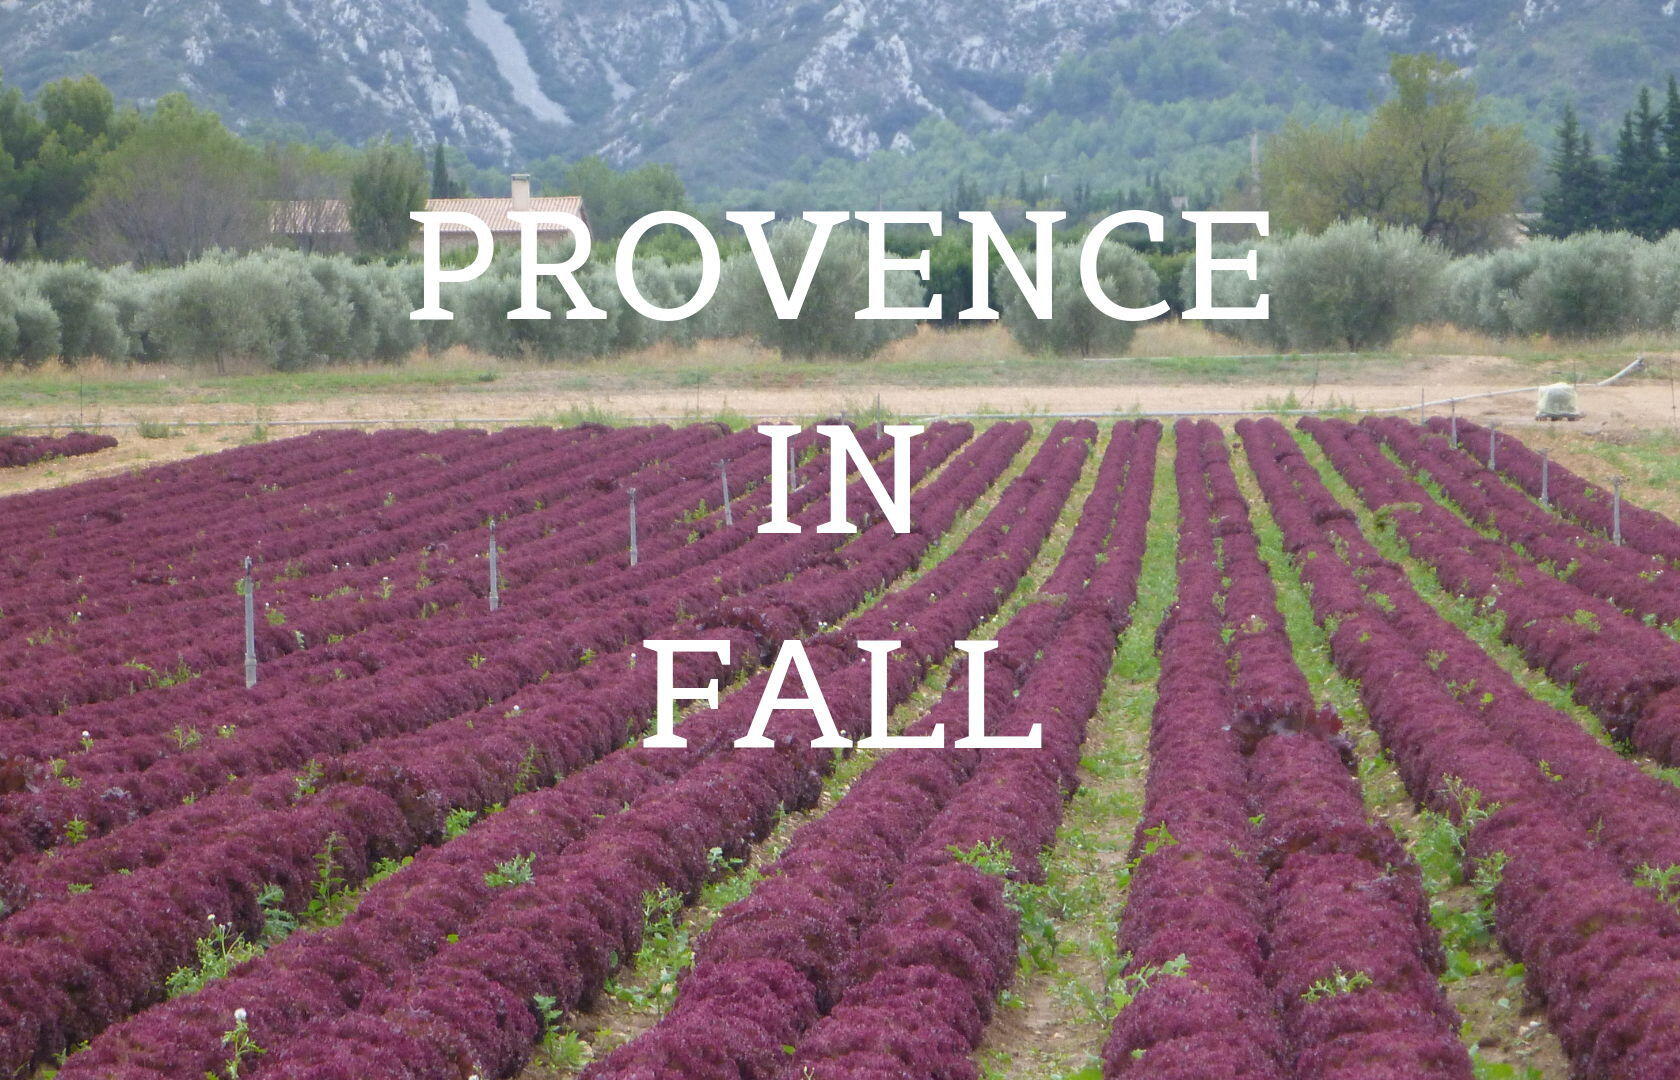 Provence Fall Festivals Flowers